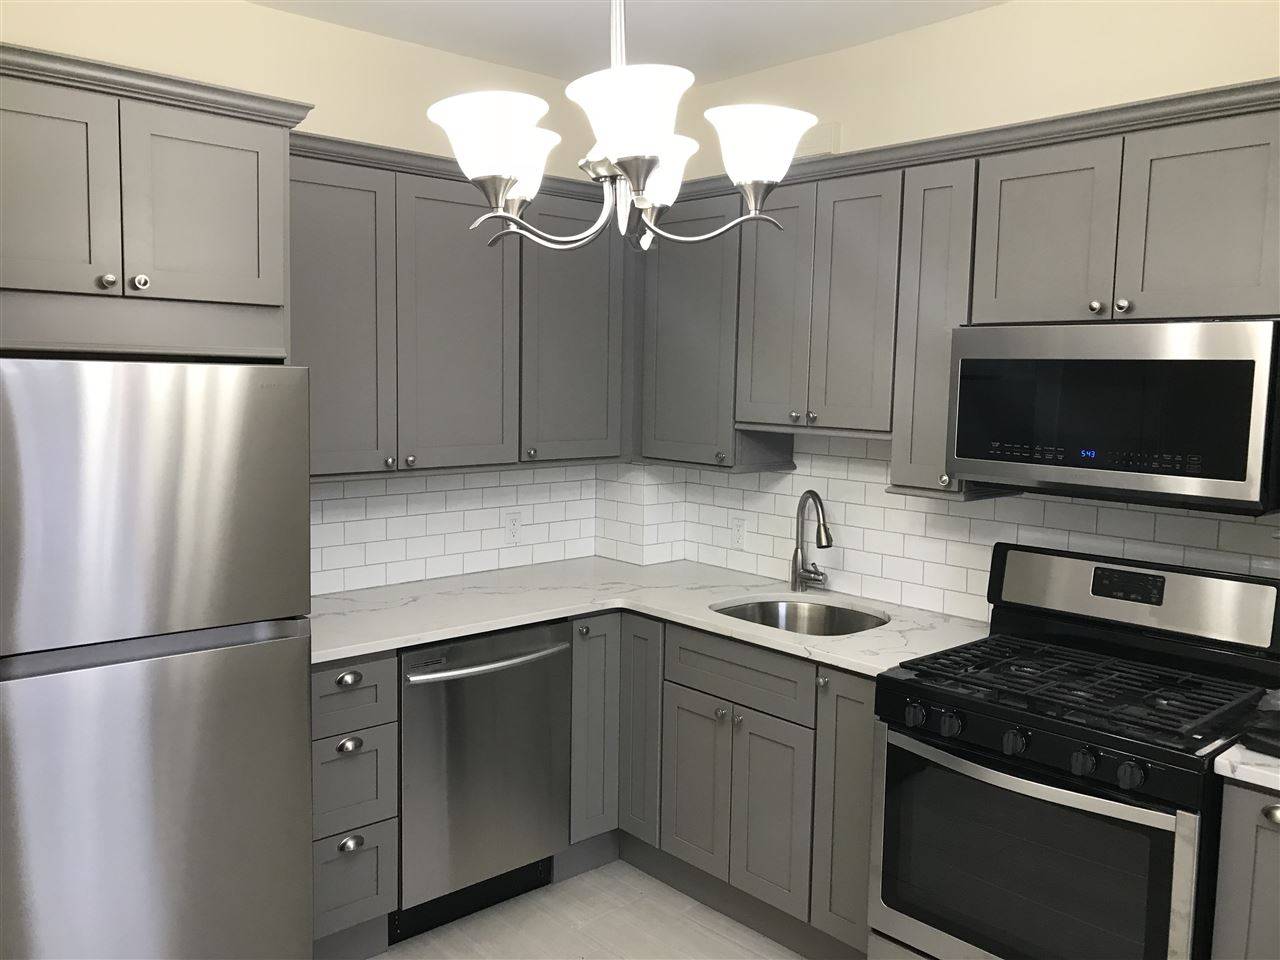 Newly renovated spacious 1200sqft 2 bedroom plus Den in a fantastic Jersey City Heights location